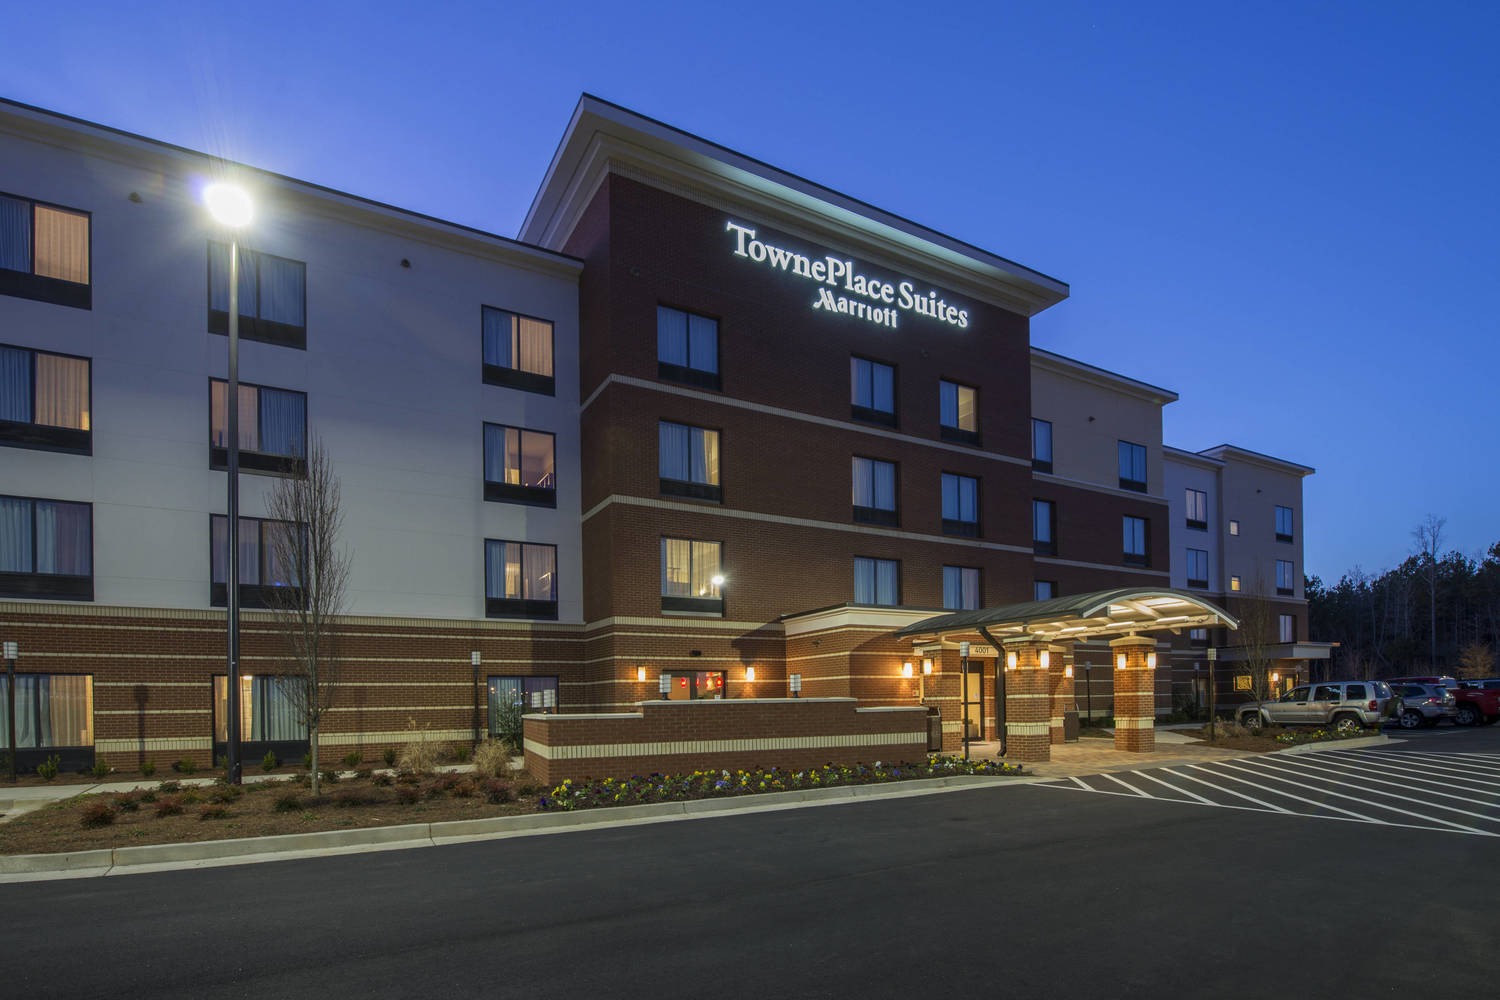 TownePlace Suites Newnan  Newnan  Jobs Hospitality Online